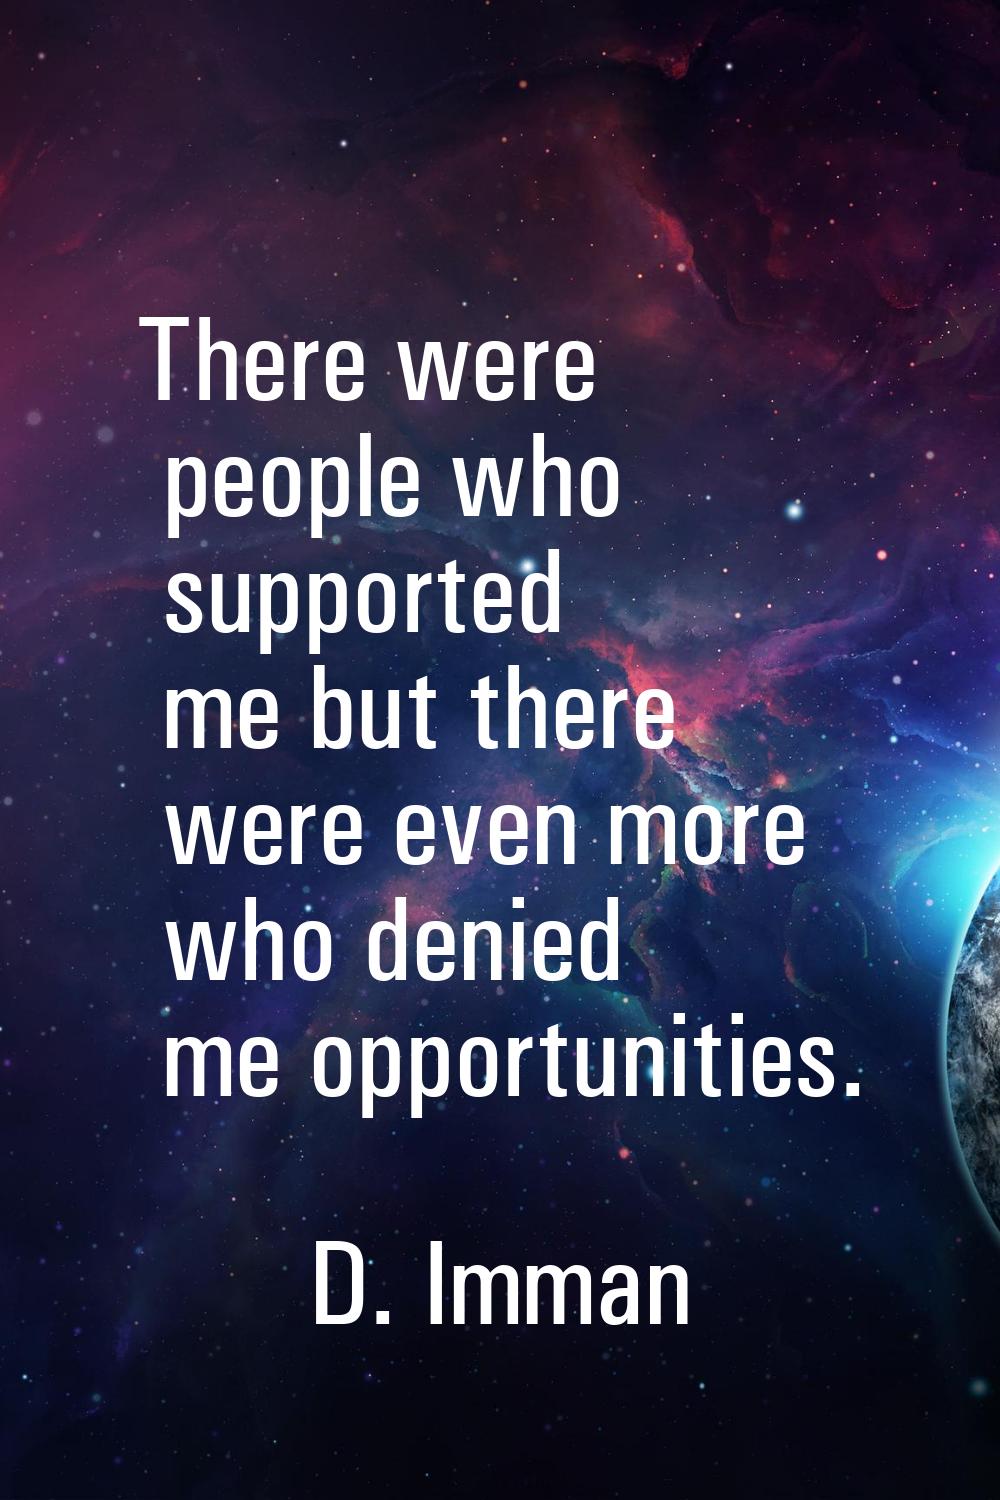 There were people who supported me but there were even more who denied me opportunities.